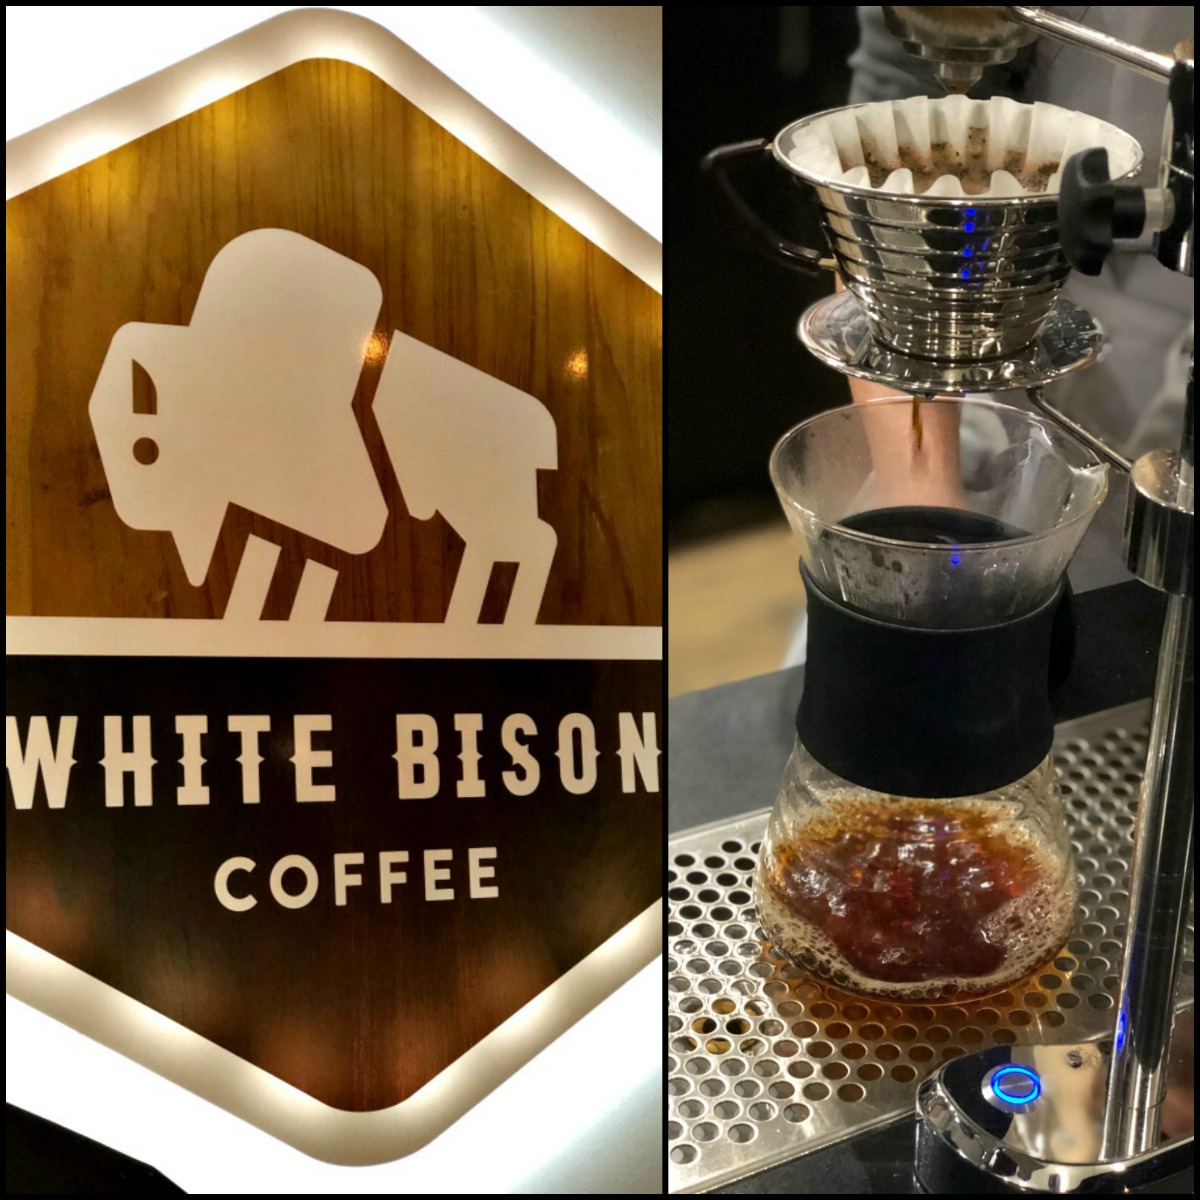 Quick Bites: White Bison Coffee from Spinach TIger